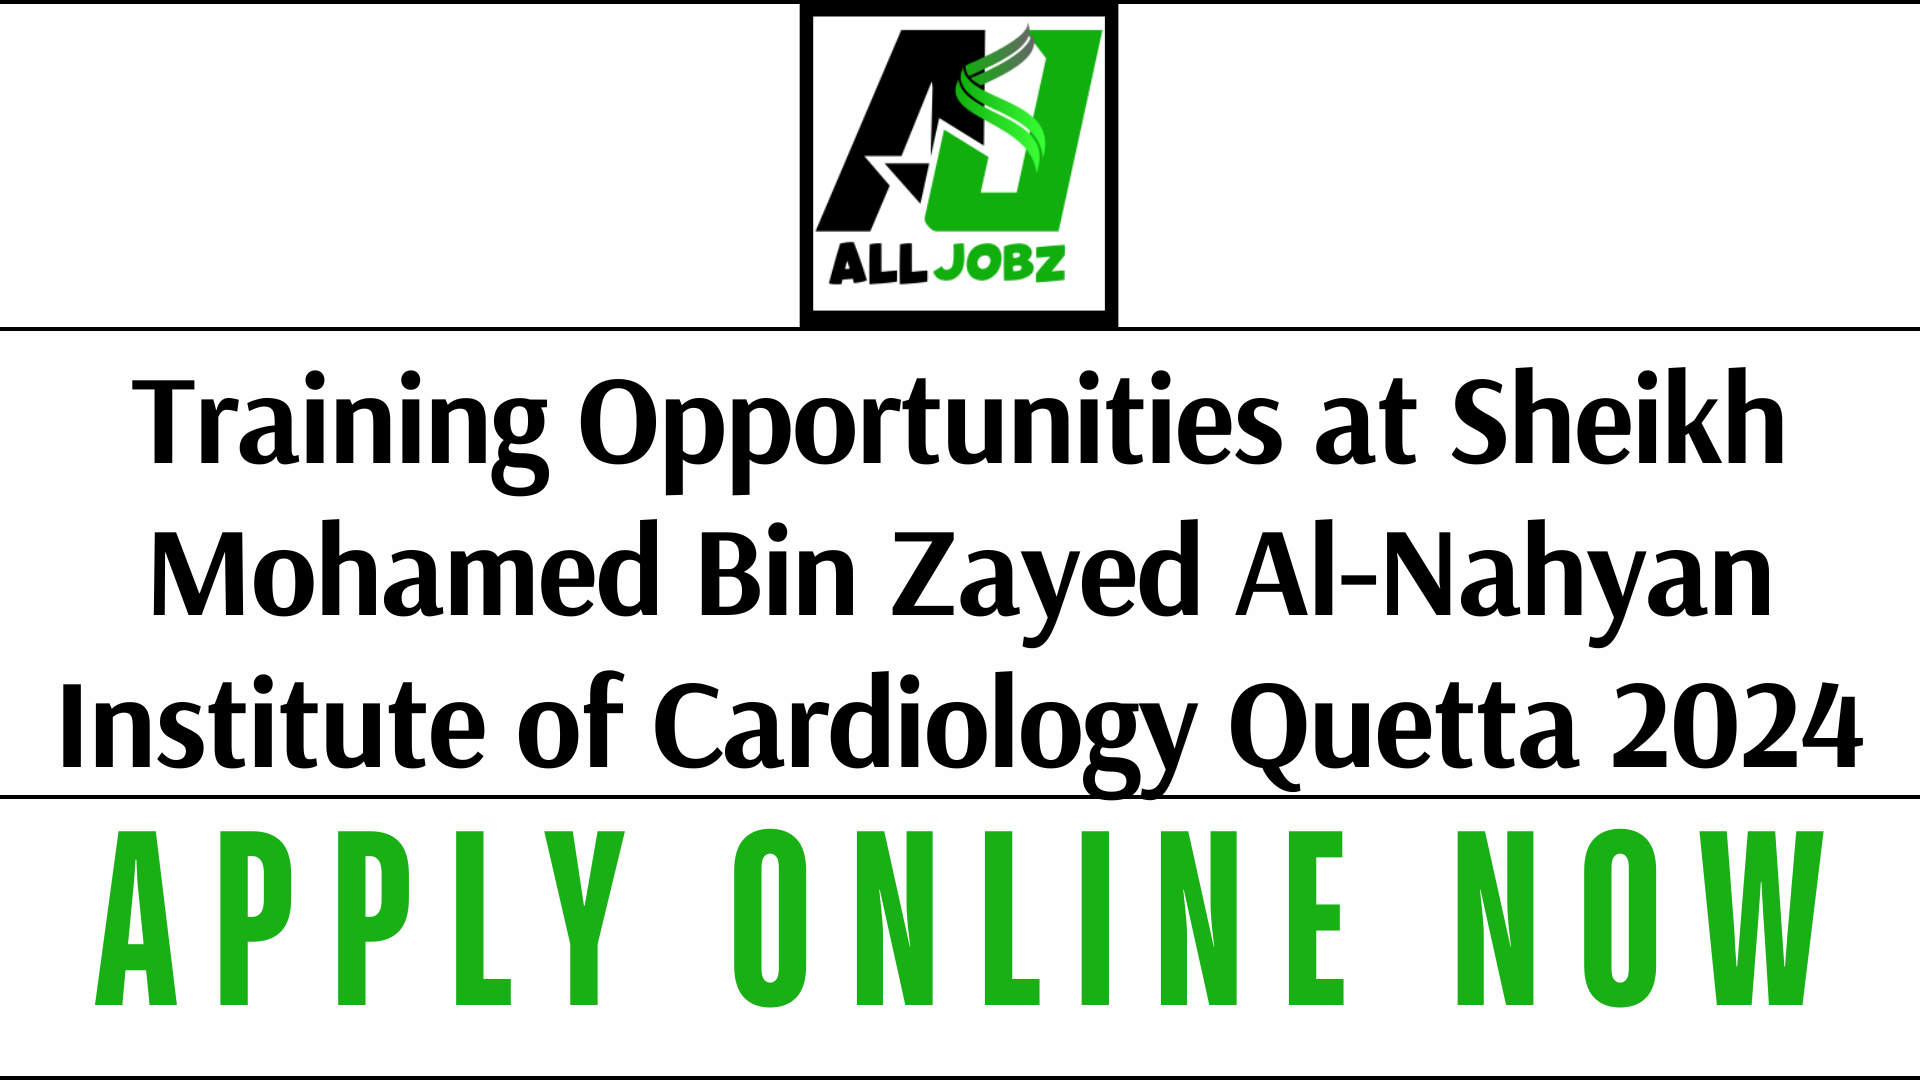 Training Opportunities At Sheikh Mohamed Bin Zayed Al-Nahyan Institute Of Cardiology Quetta 2024